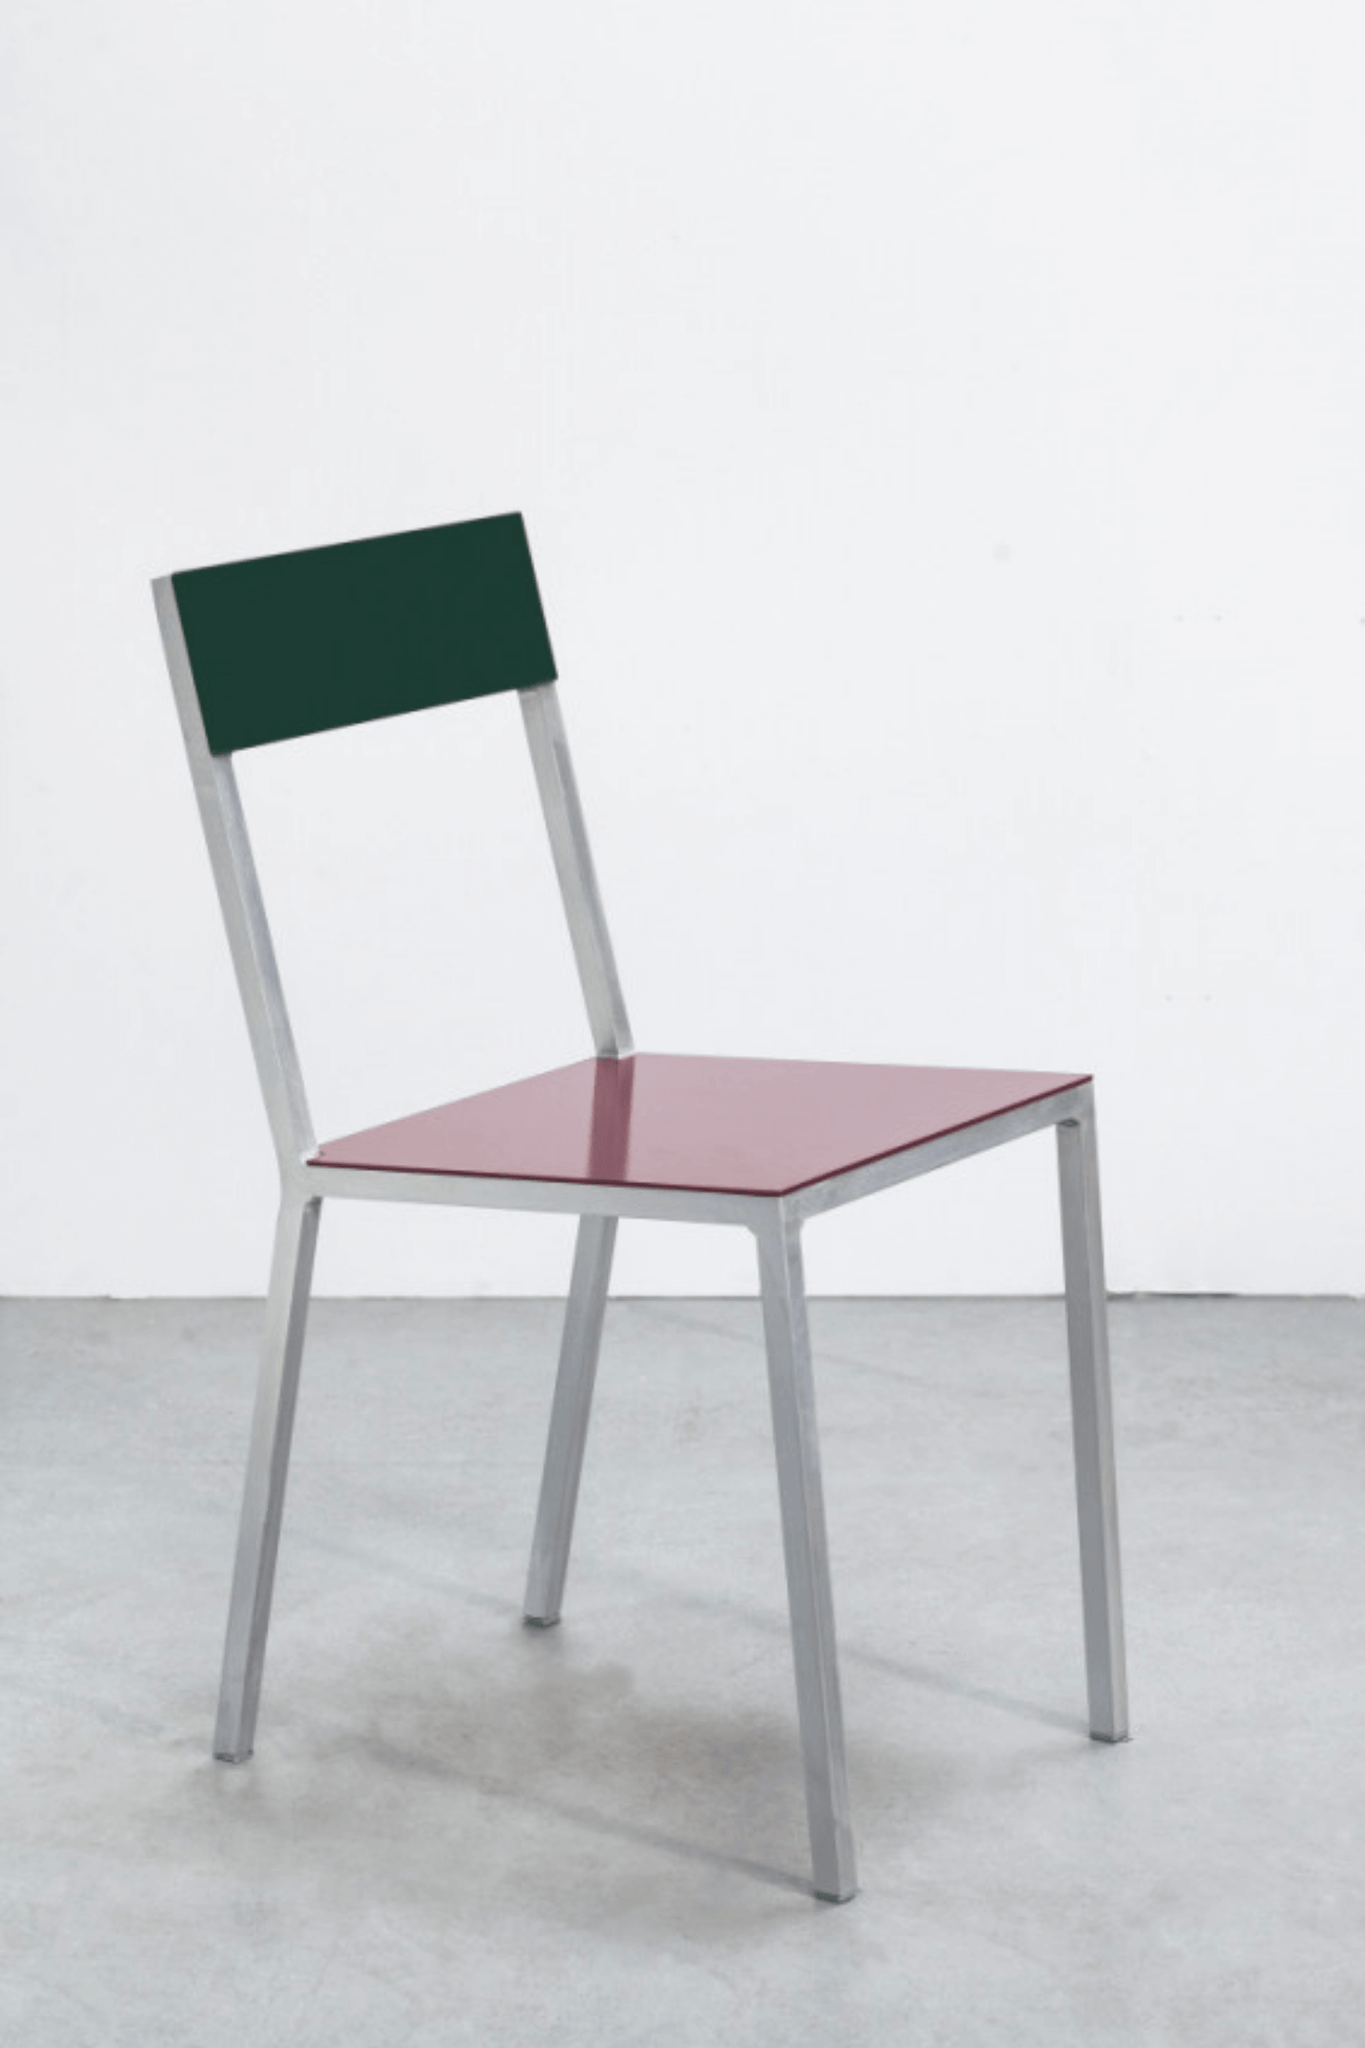 Burgundy & Candy Green Aluminum Alu Chair by Muller Van Severen for Valerie Objects, front angled view